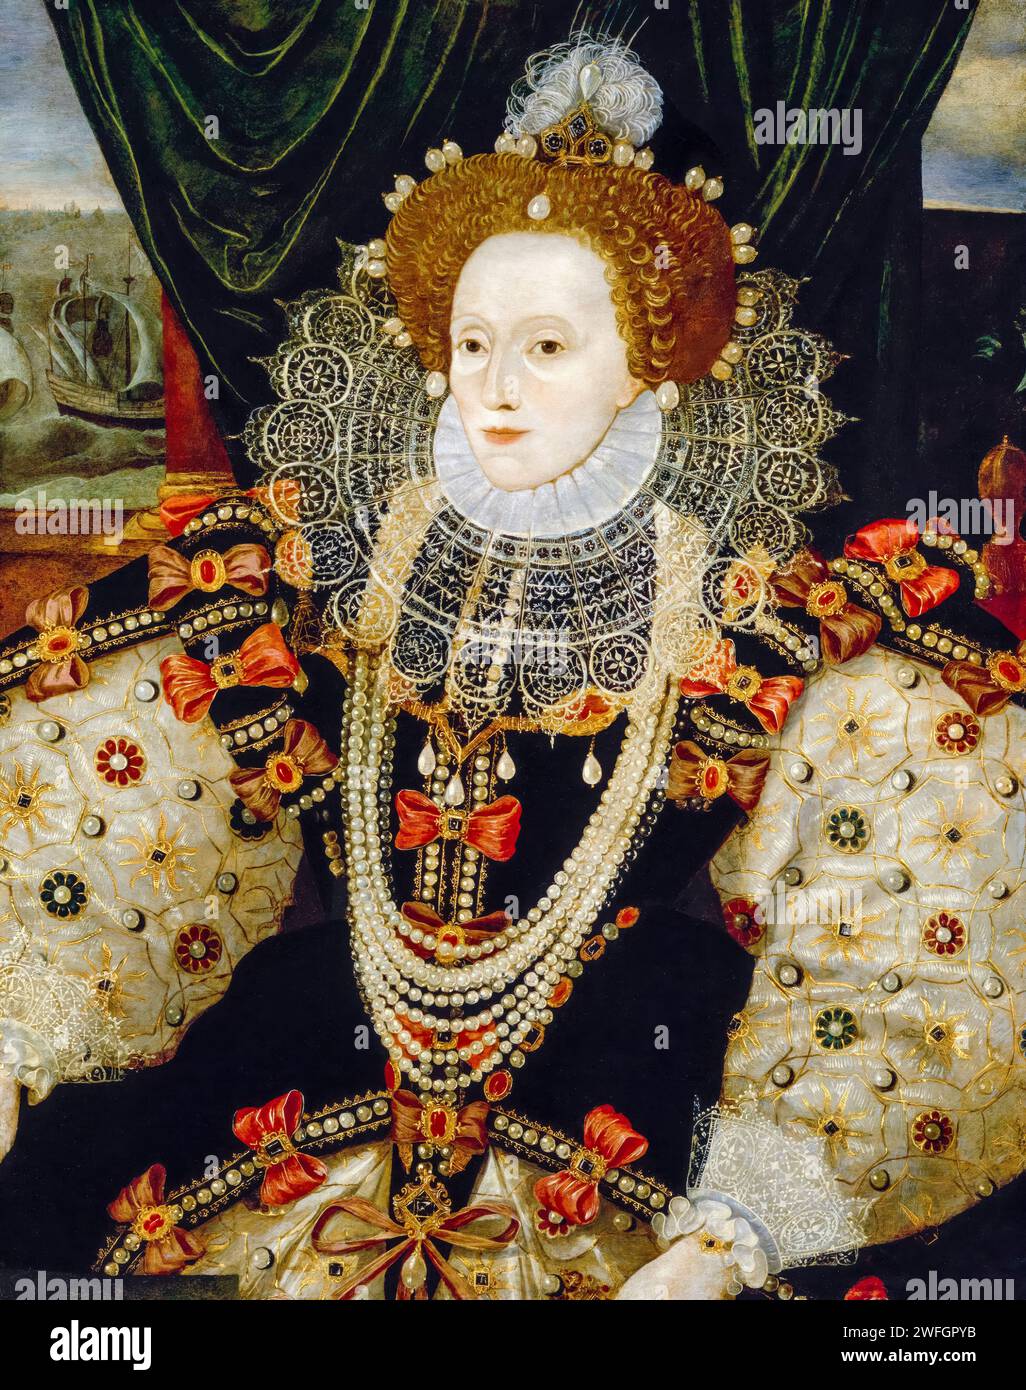 Elizabeth I of England (1533-1603), Queen of England and Ireland (1558-1603), The Armada Portrait, painting in oil on panel, circa 1588 Stock Photo